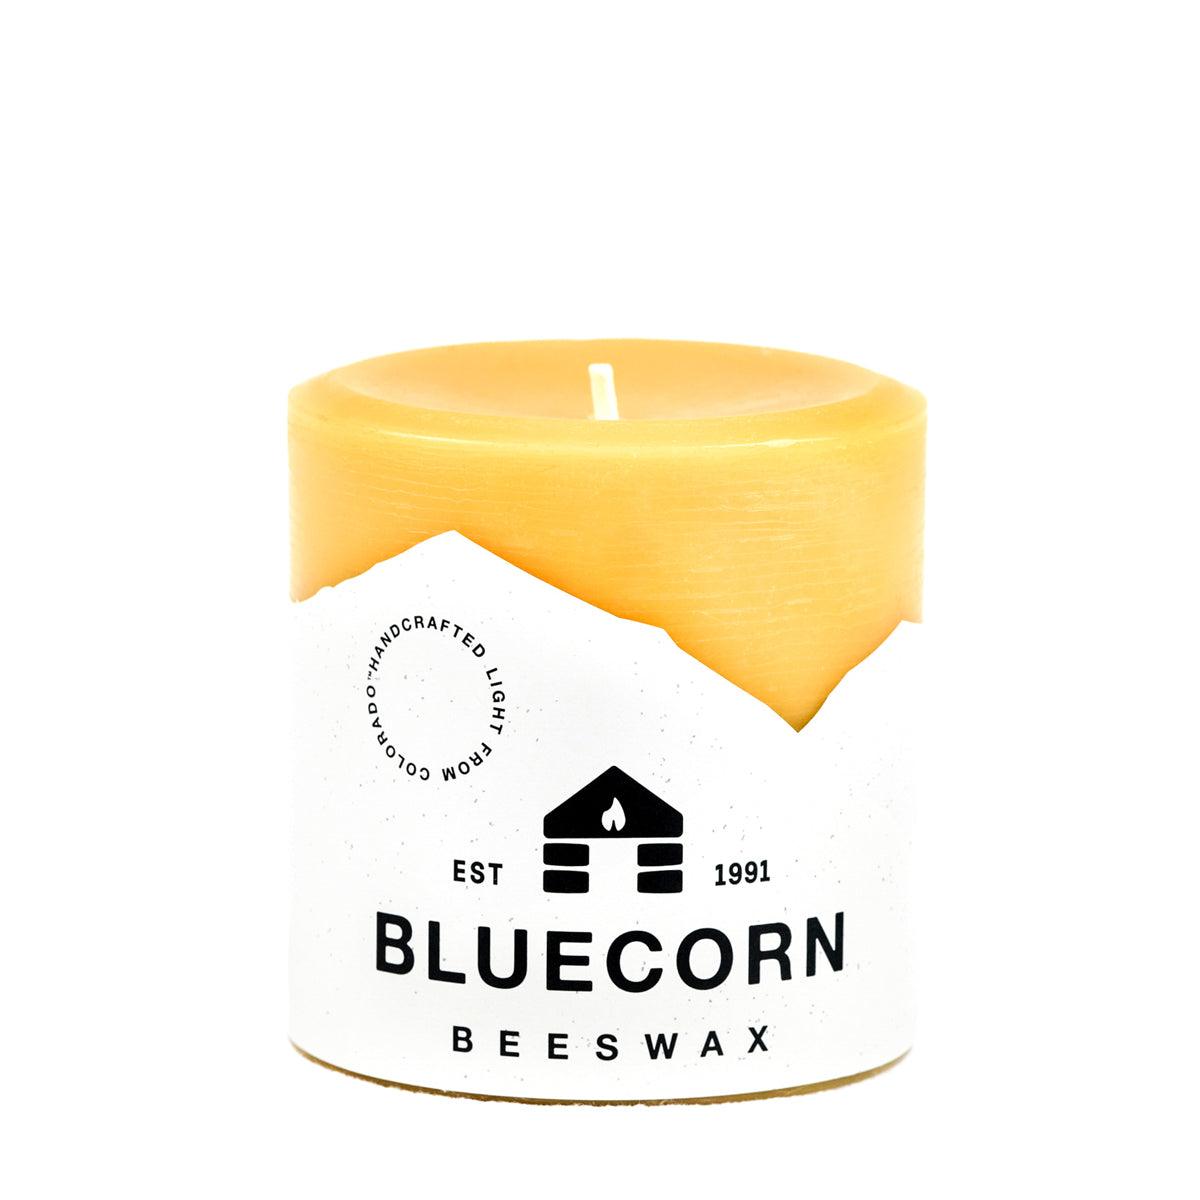 Bluecorn Beeswax 100% Pure Beeswax 4" x 4" Raw Pillar Candle. Burn Time: 120 hours. Made with 100% Pure Beeswax, is golden in color, with a light honey scent. Made with 100% pure cotton wick, no lead and paraffin free. Clean burning and non-toxic. Features Bluecorn Beeswax label printed on 100% recycled paper. 